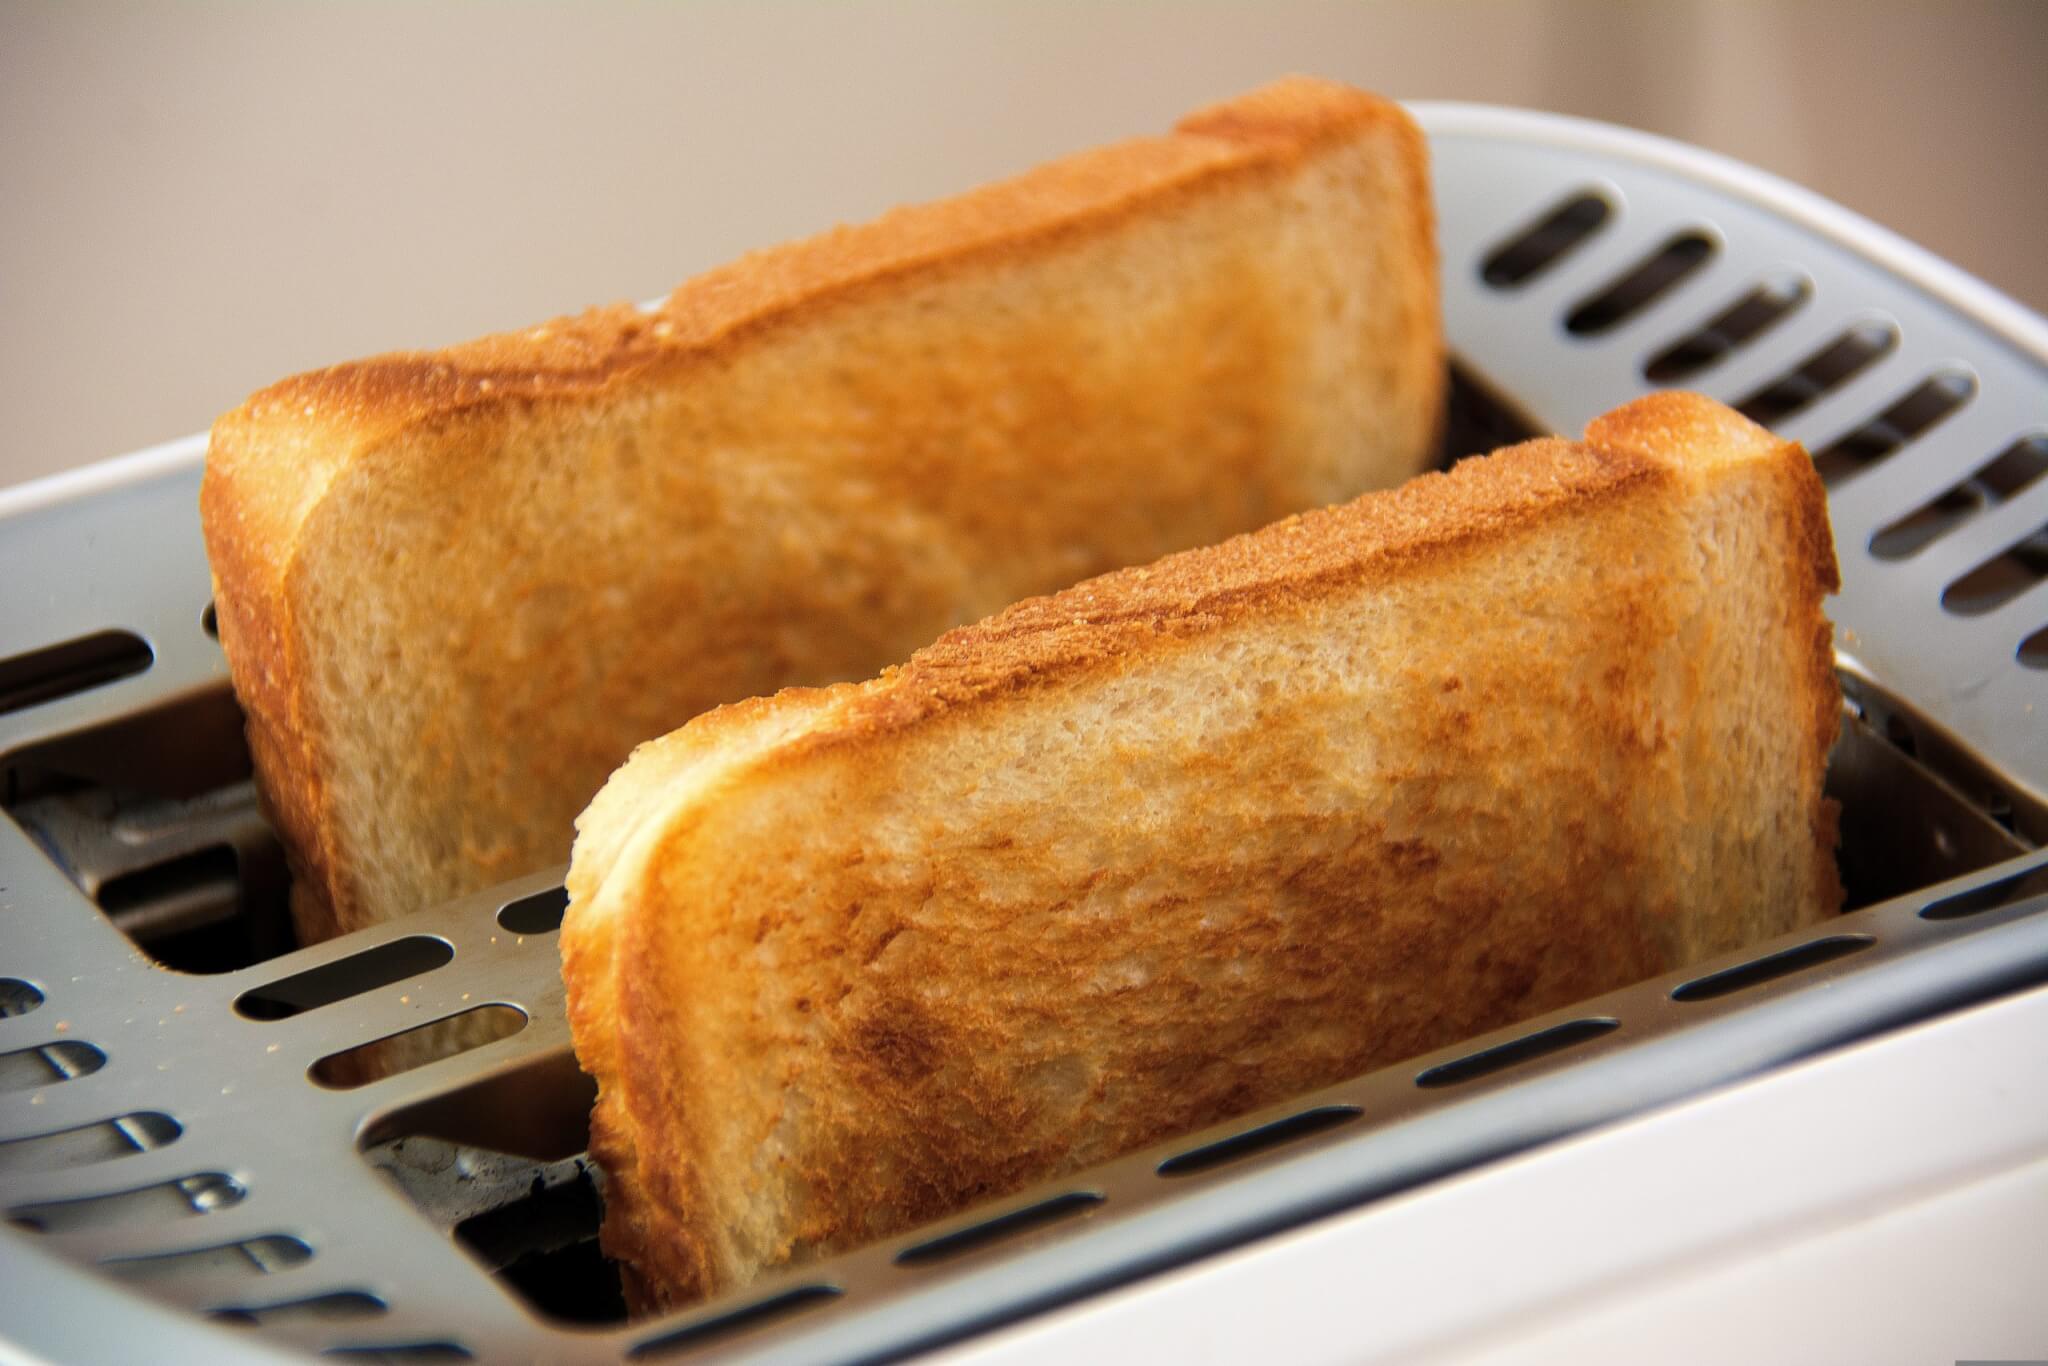 The best toasters of 2023